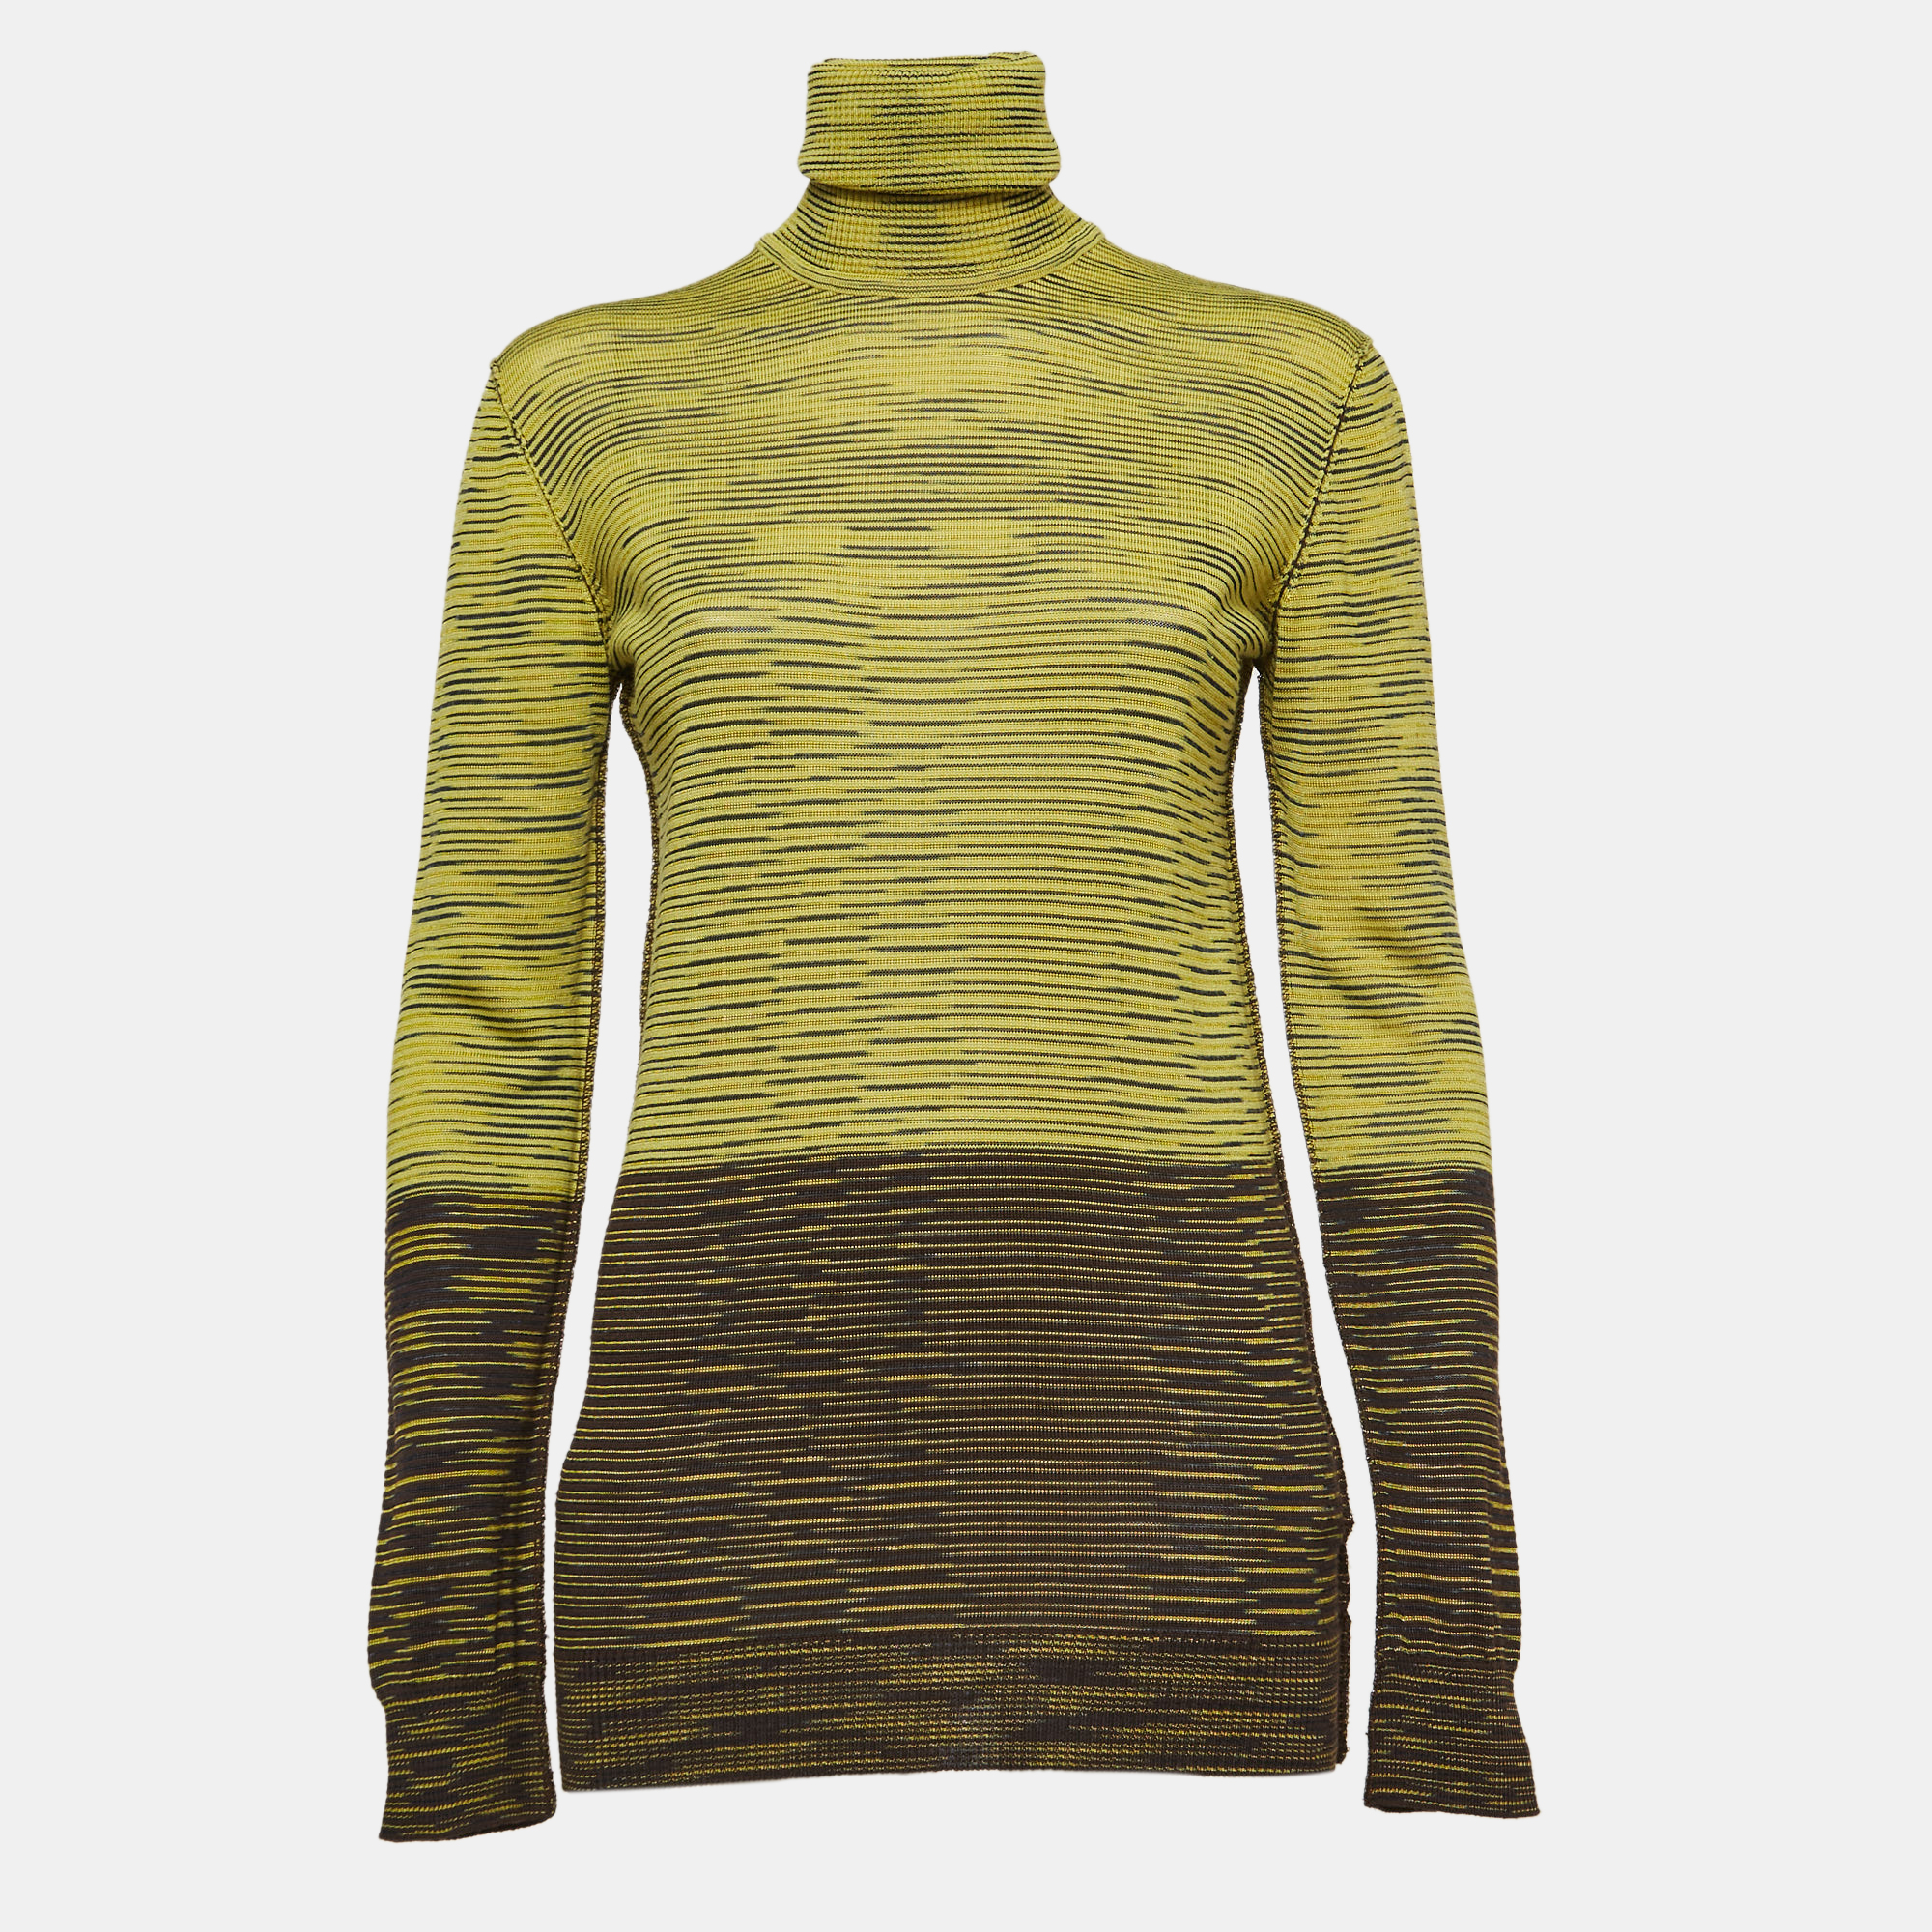 

M Missoni Yellow/Brown Patterned Knit Turtle Neck Sweater L